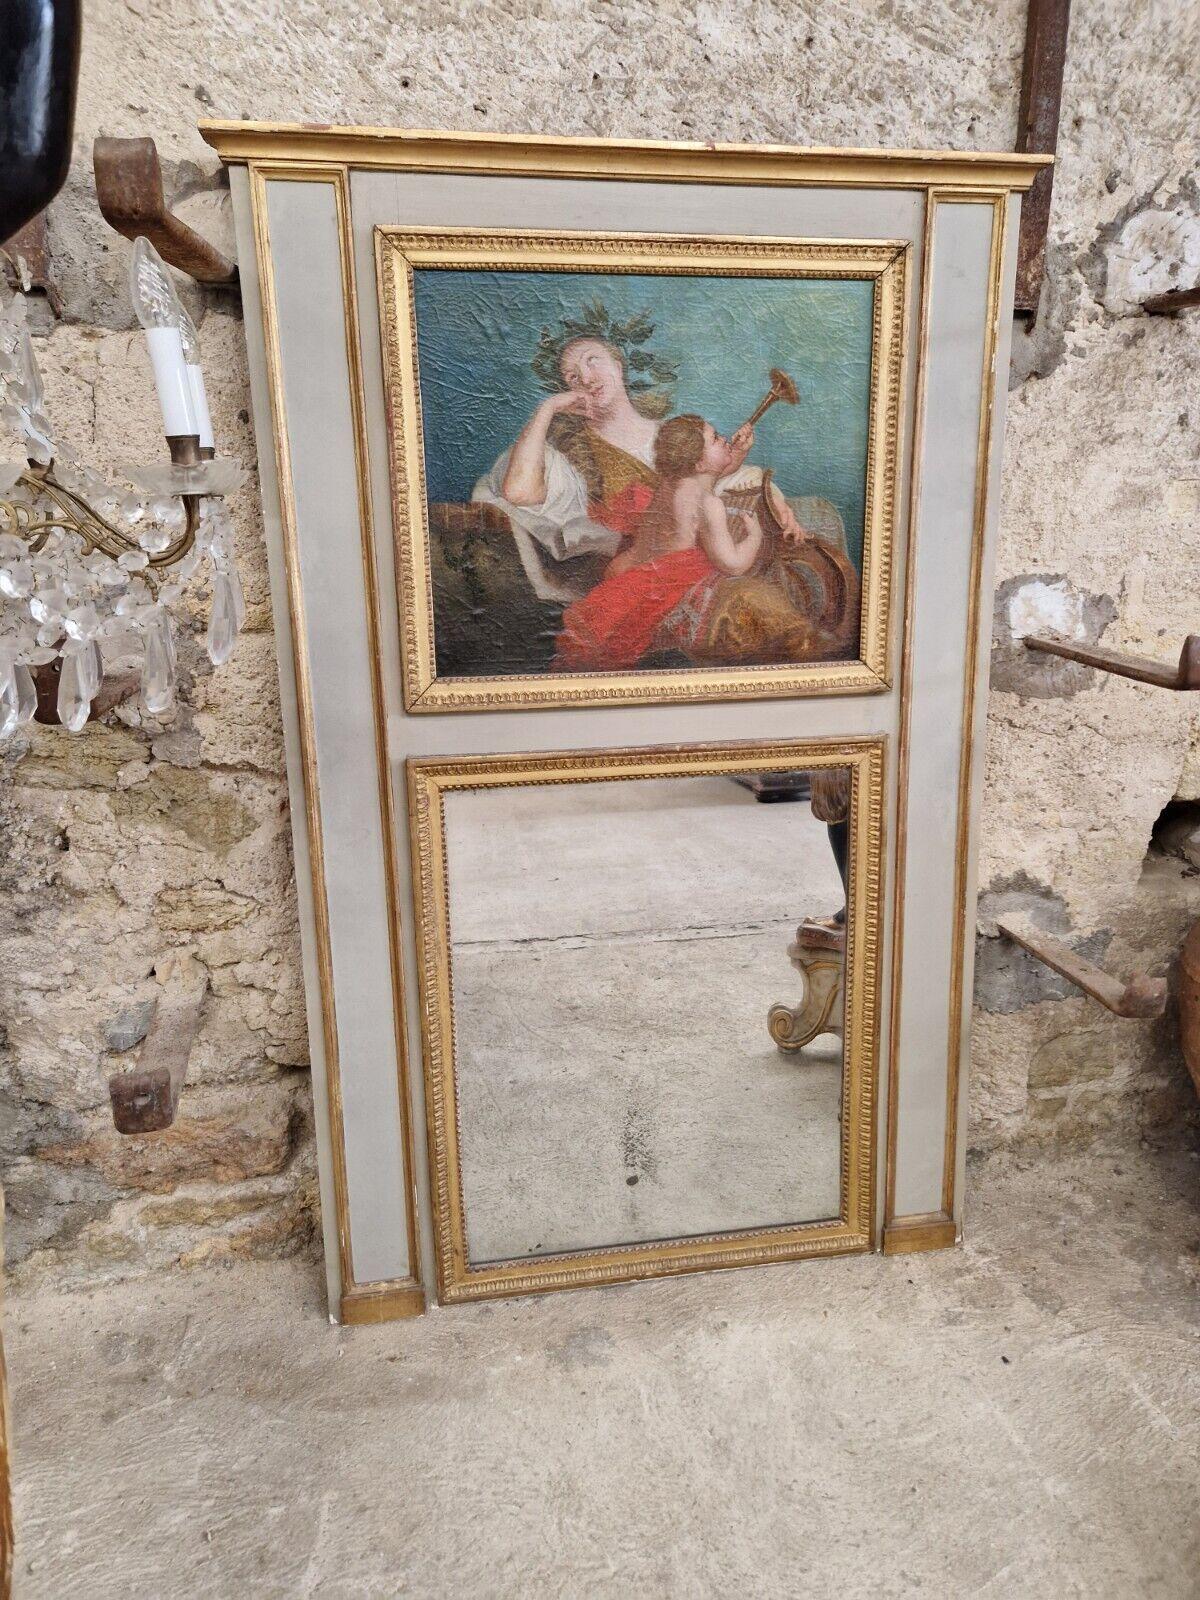 Antique Over Mantle Mirror, French grey Trumeau Mirror with Beautiful Oil Painting, 19th century period.
In the Louis XVI style,  Lacquered and Water Gilded, with pearls around the wood frame 
Foxed original Mirror plate and wood panel back.
A